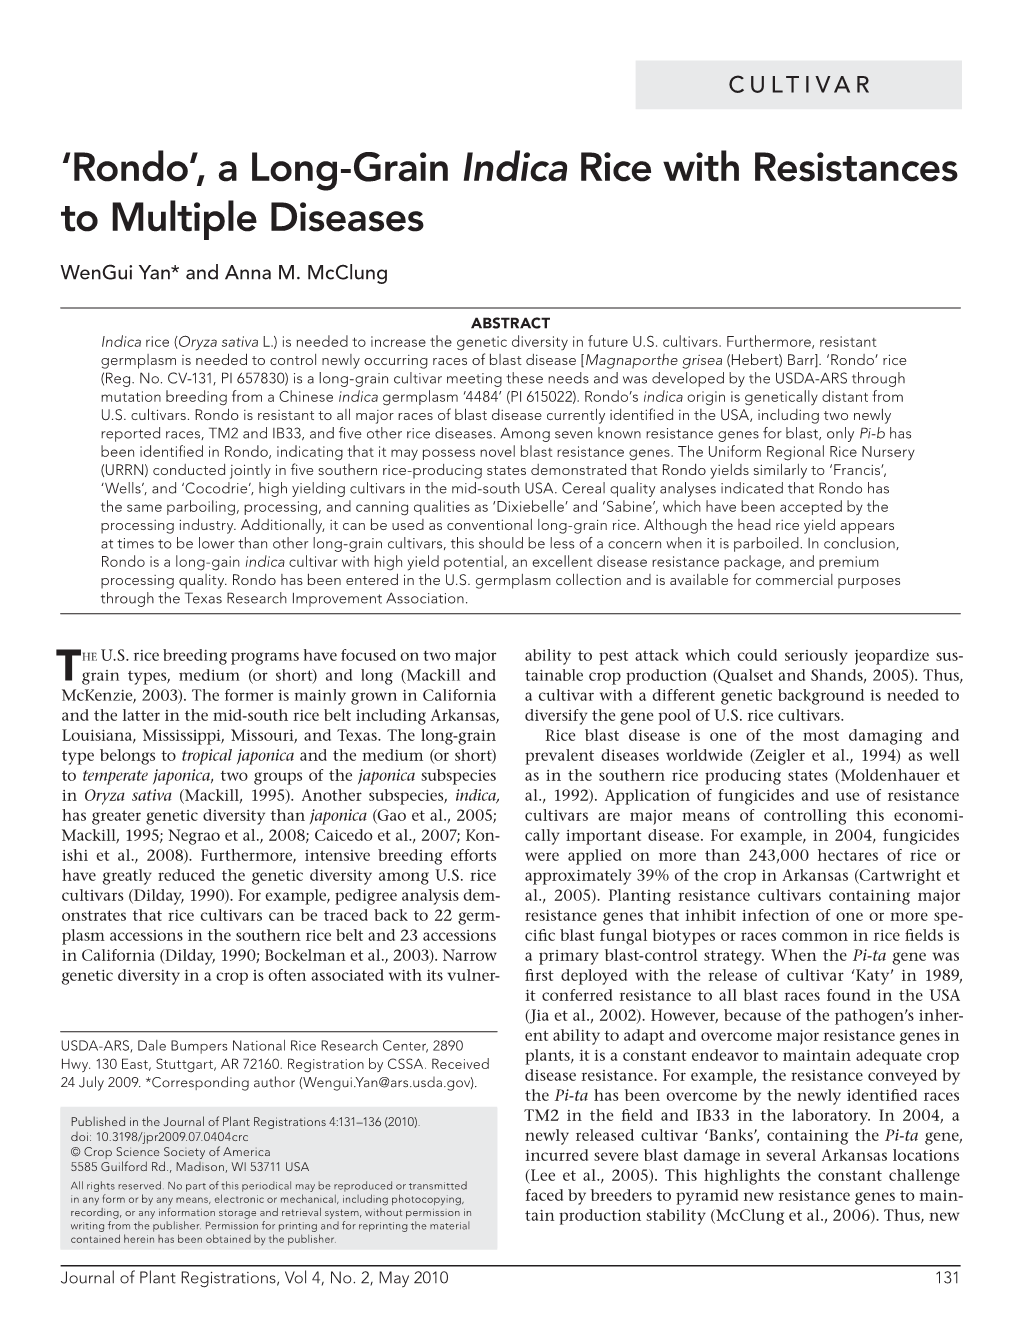 A Long-Grain Indica Rice with Resistances to Multiple Diseases